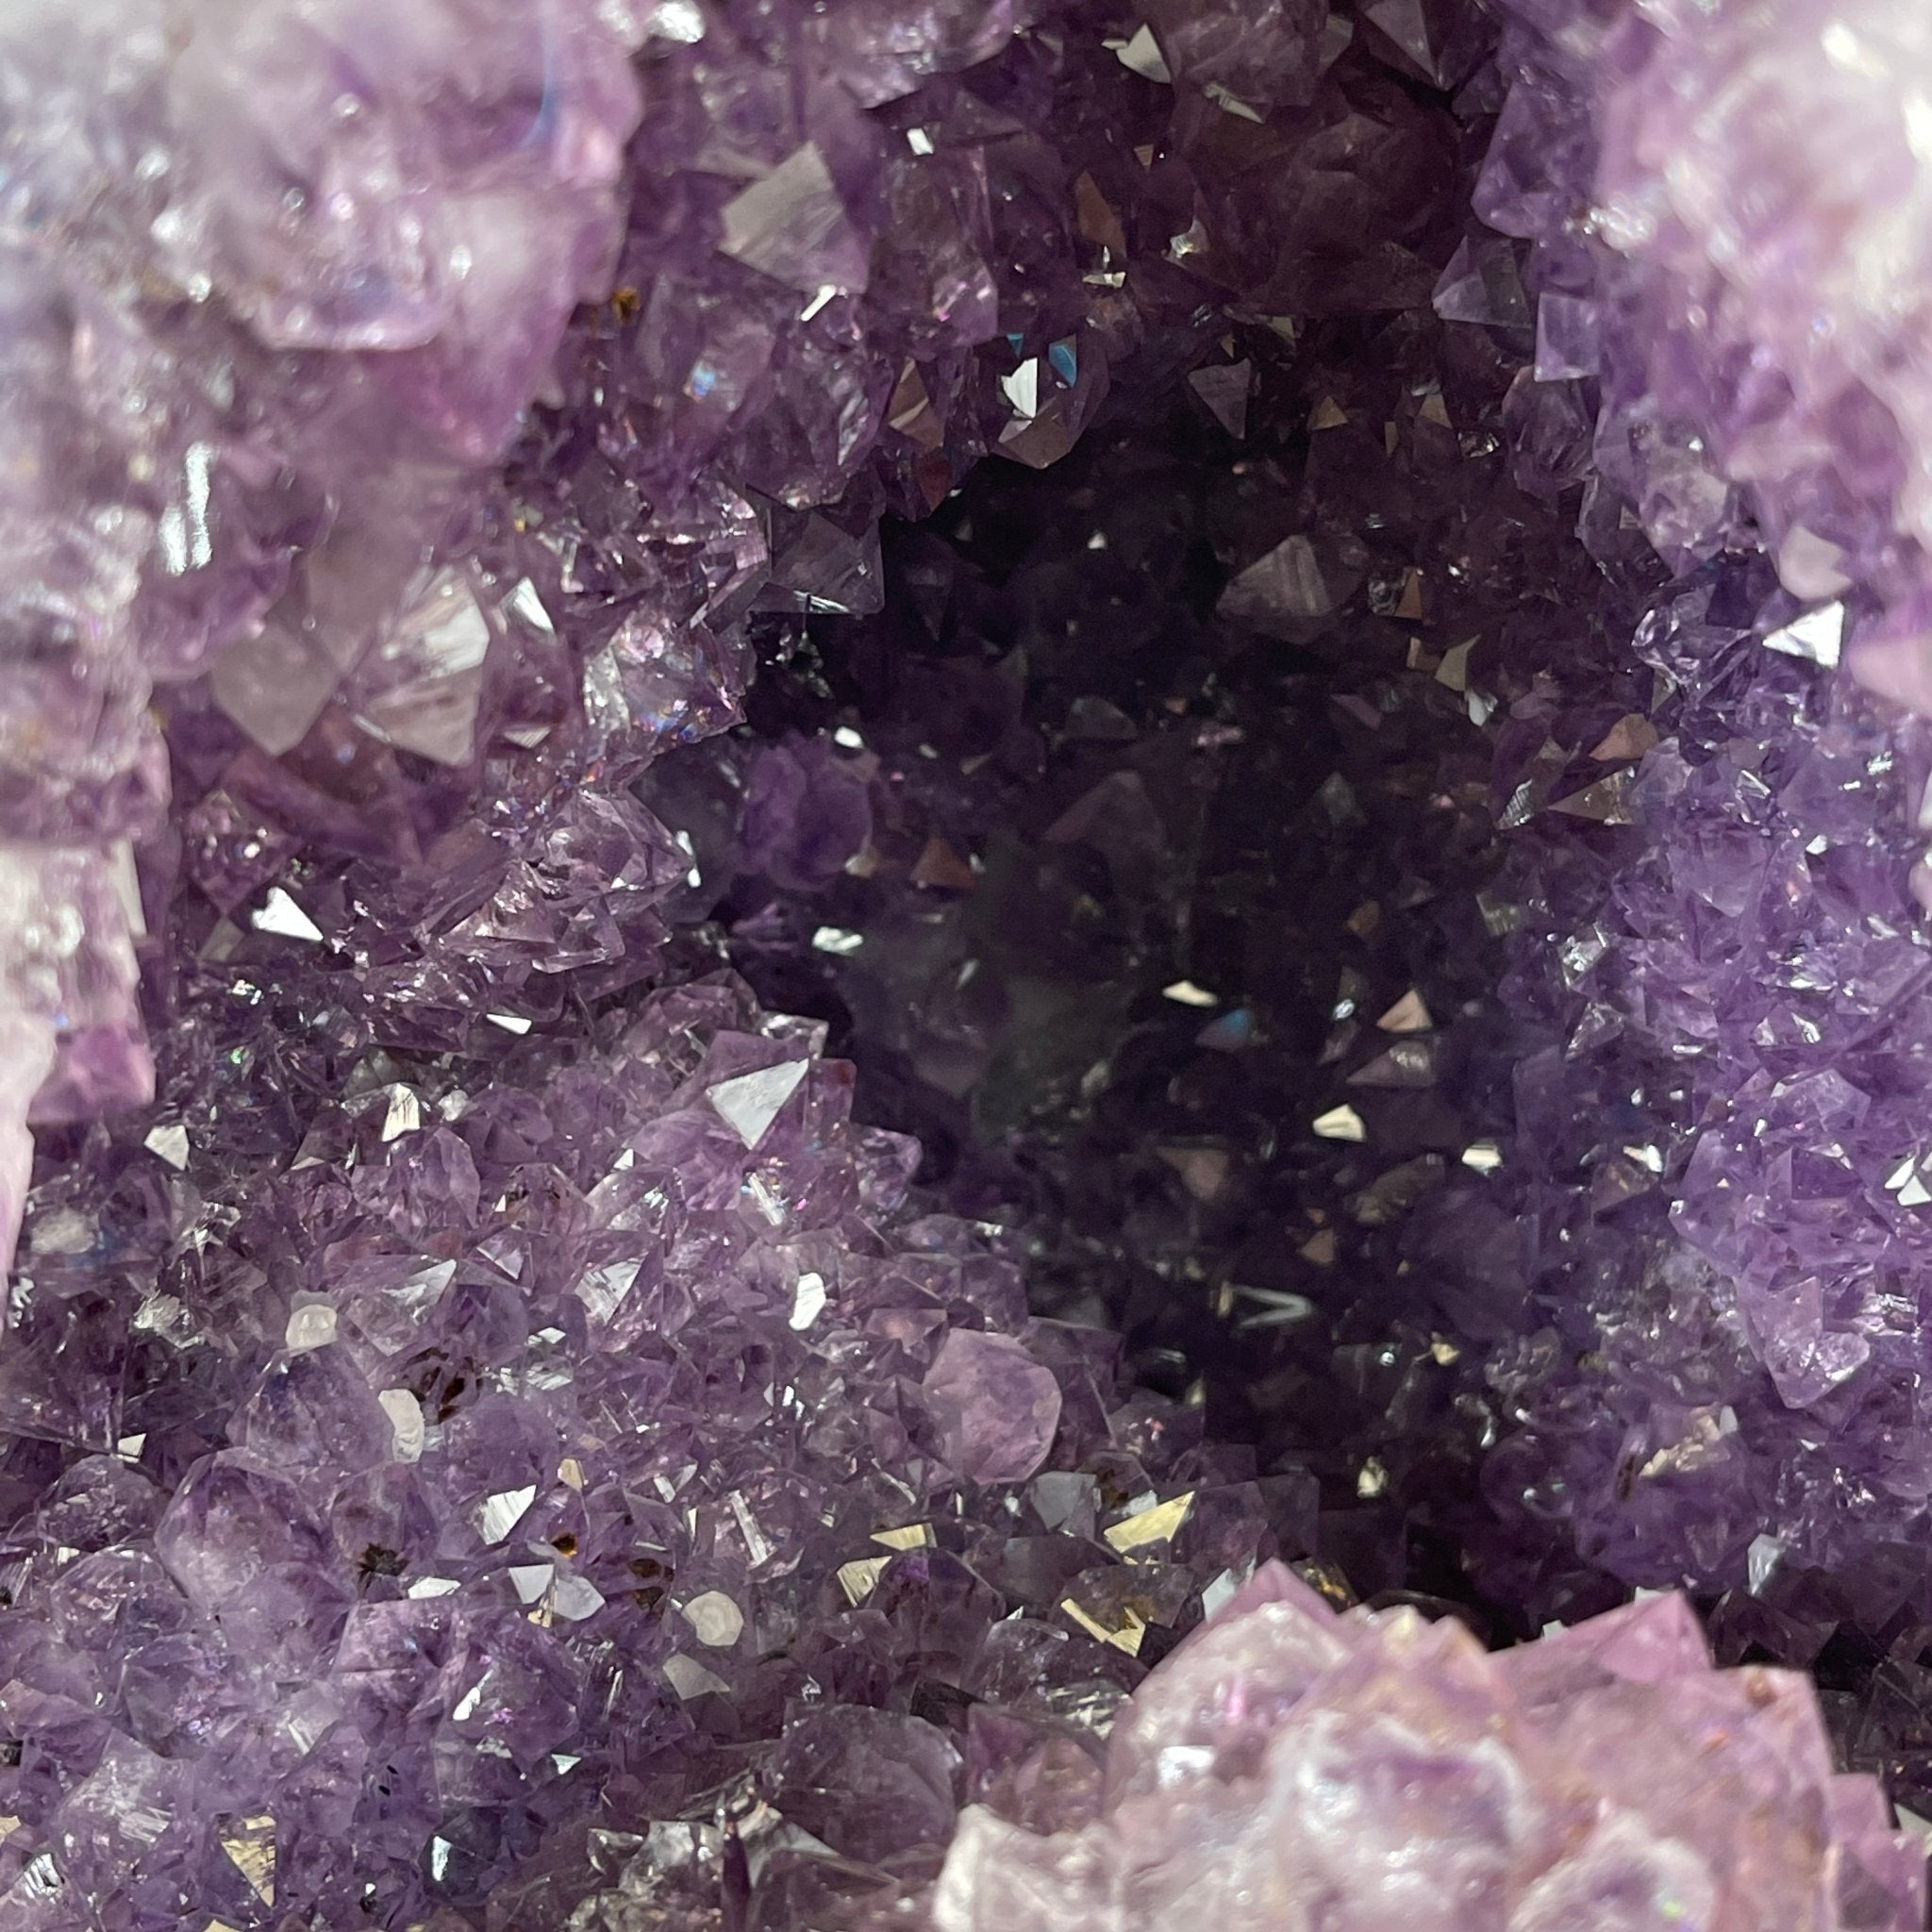 Extra Quality Brazilian Amethyst Cathedral, 9.1” tall & 22.1 lbs #5601-0584 by Brazil Gems - Brazil GemsBrazil GemsExtra Quality Brazilian Amethyst Cathedral, 9.1” tall & 22.1 lbs #5601-0584 by Brazil GemsCathedrals5601-0584